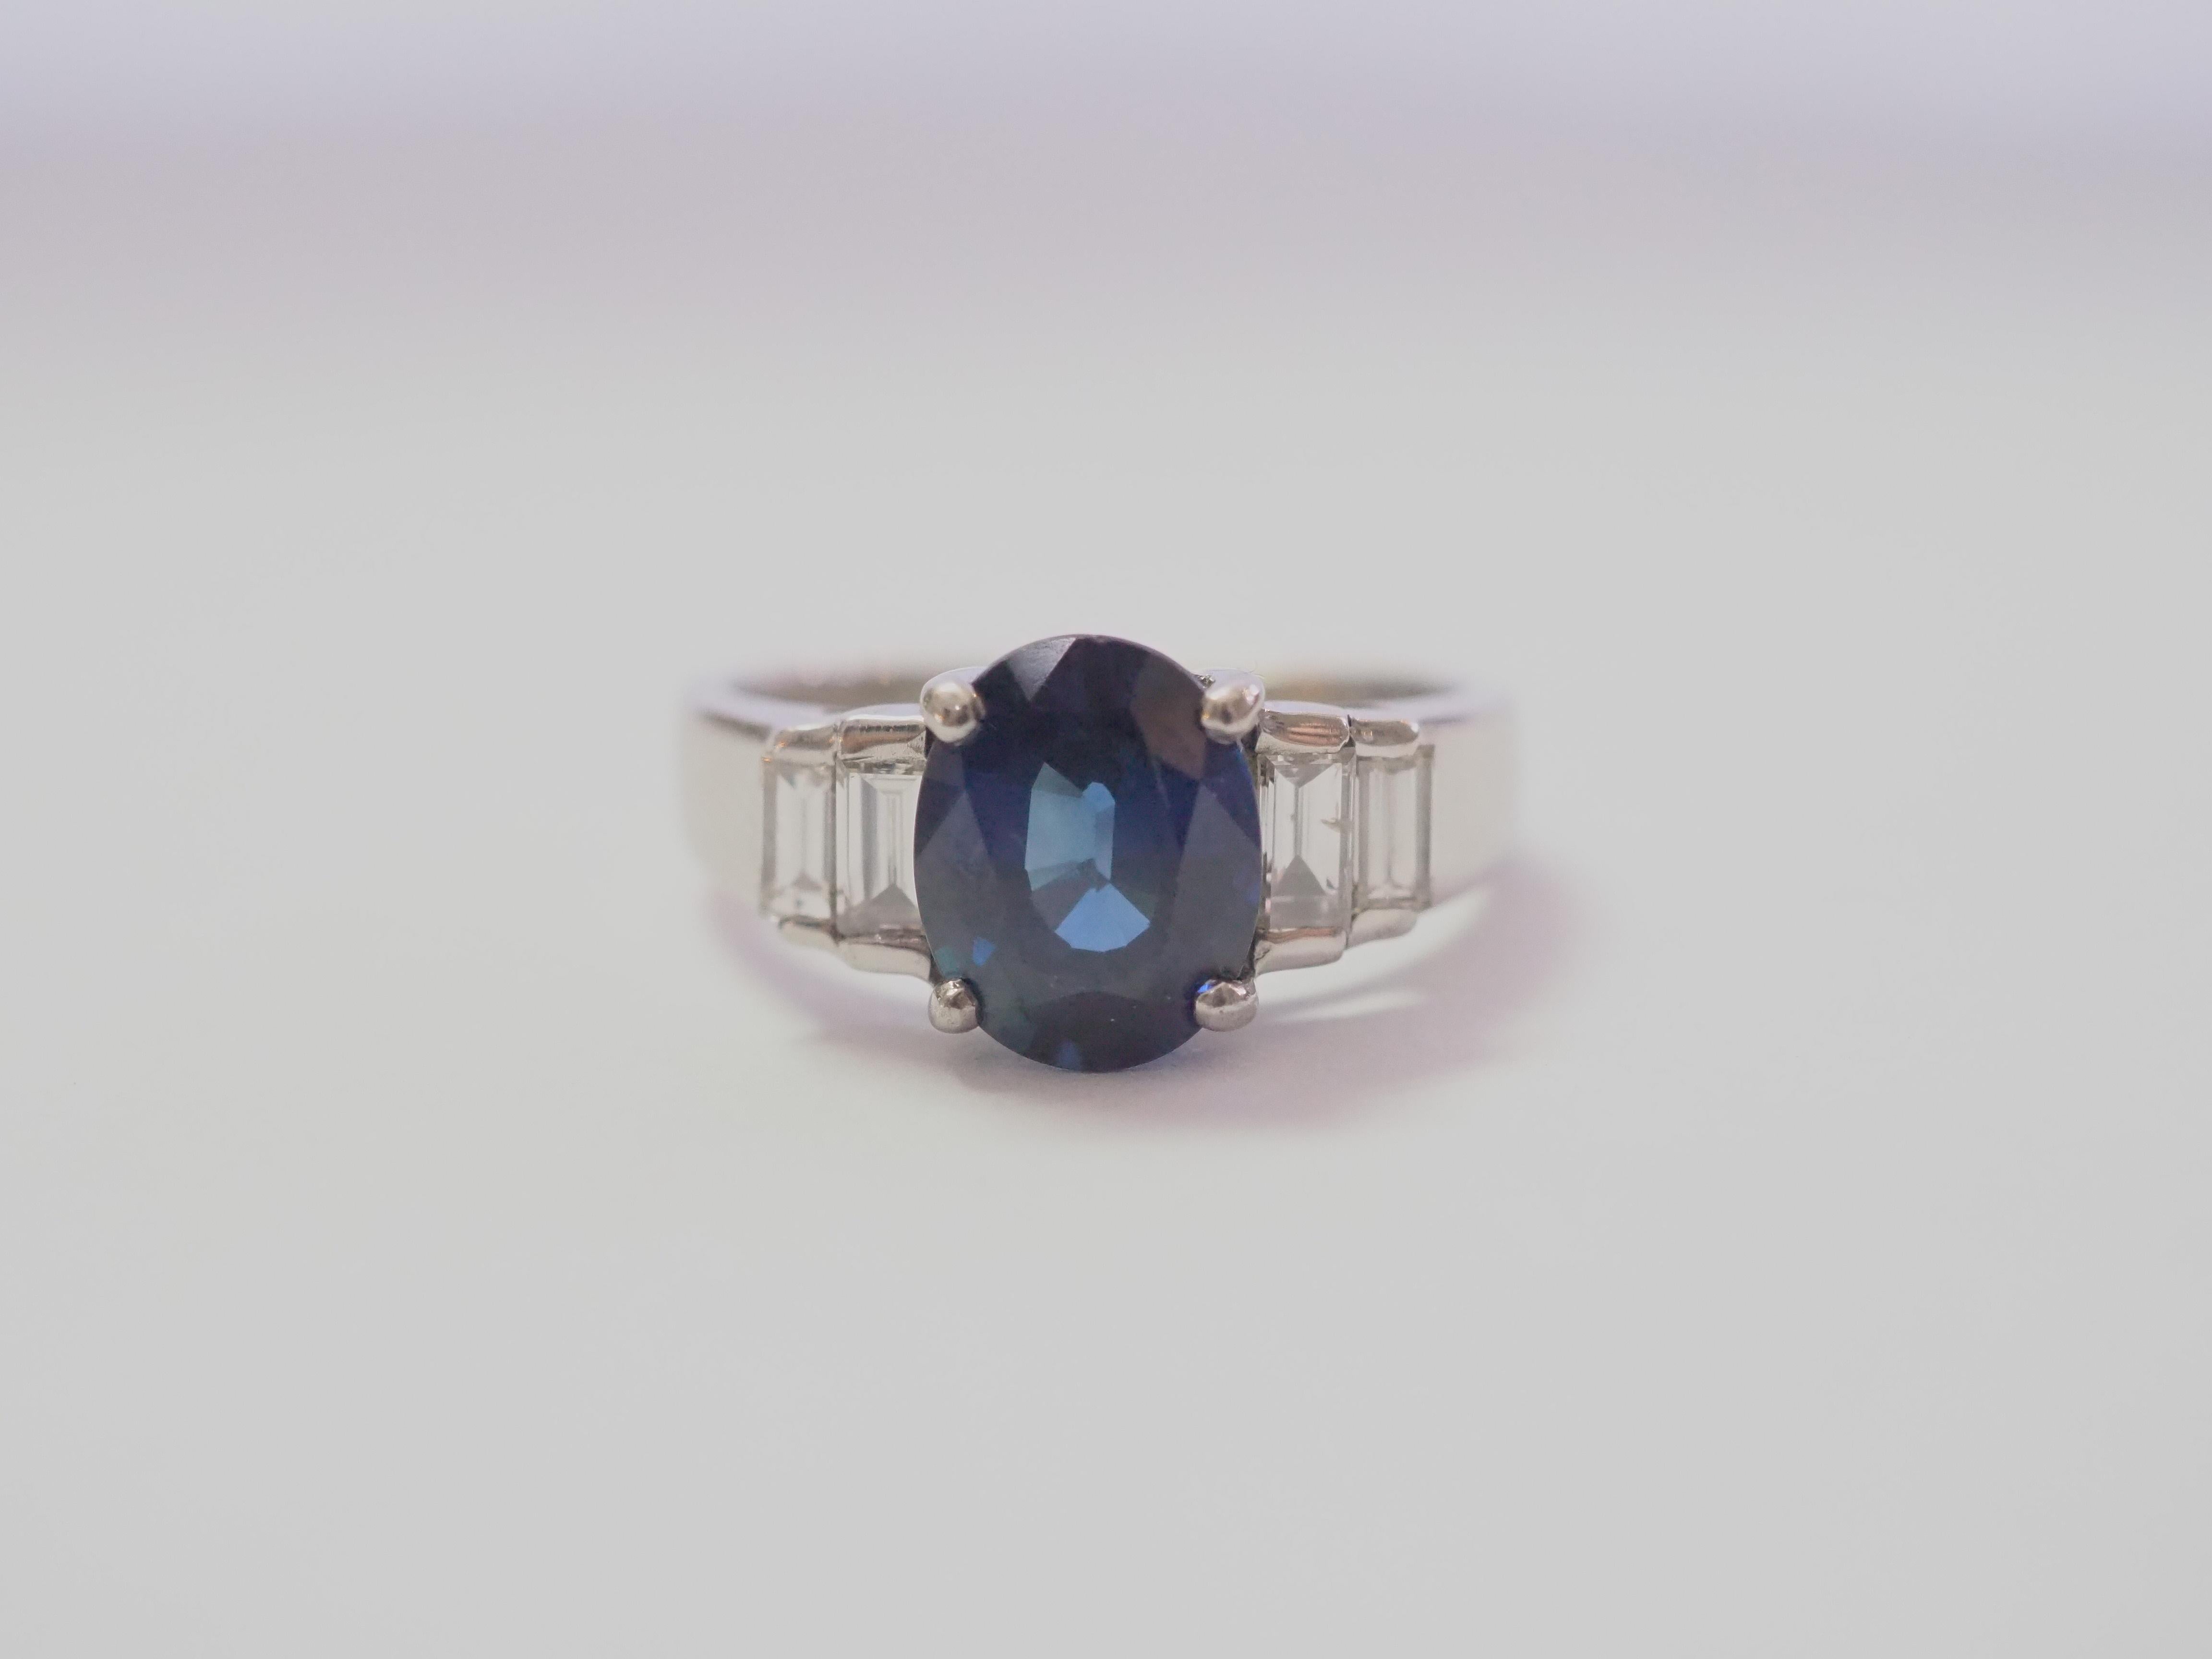 A finely crafted sapphire and diamond engagement ring. The 2.10 carats oval blue sapphire is eye clean and has dark tone and medium color saturation but is very vibrant and lively. The cut is perfect as well. 

The diamonds are bright and white with